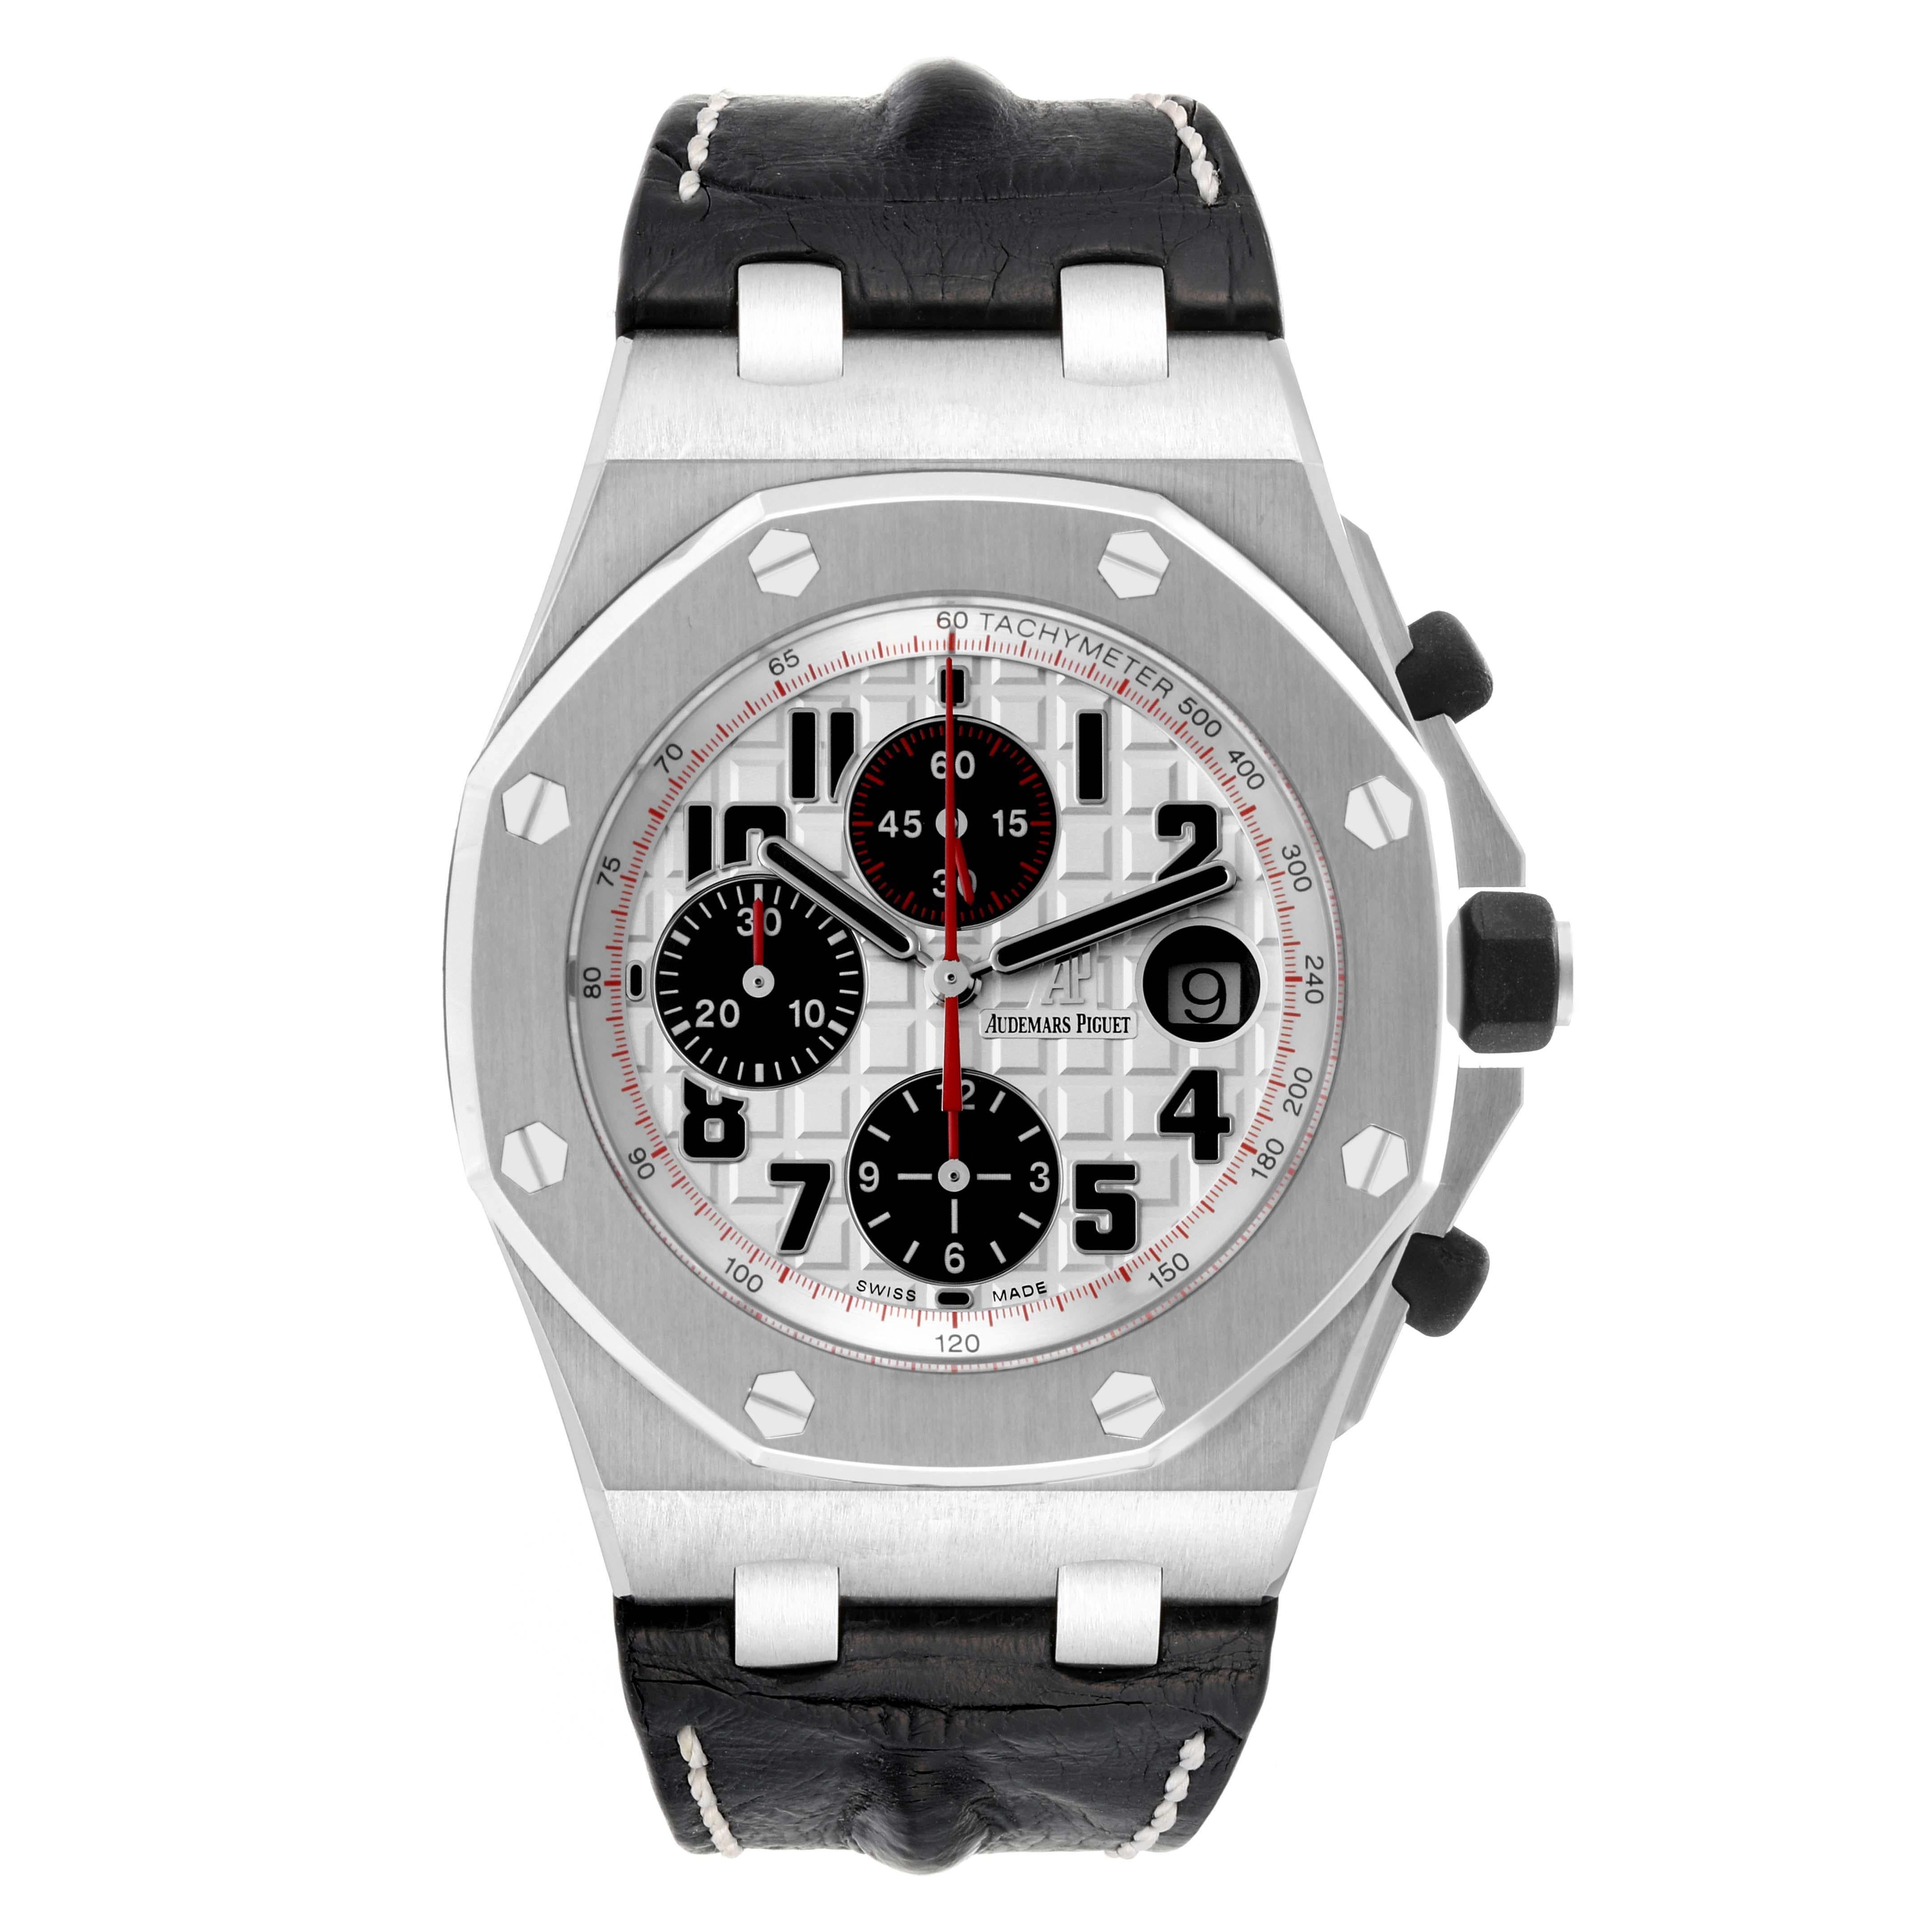 Audemars Piguet Royal Oak Offshore Steel Mens Watch 26170ST Box Papers. Automatic self-winding movement. Stainless steel octagonal case 42 mm in diameter. Case thickness: 14.2 mm. Solid case back. Black rubber-clad screw-down crowns. Stainless steel